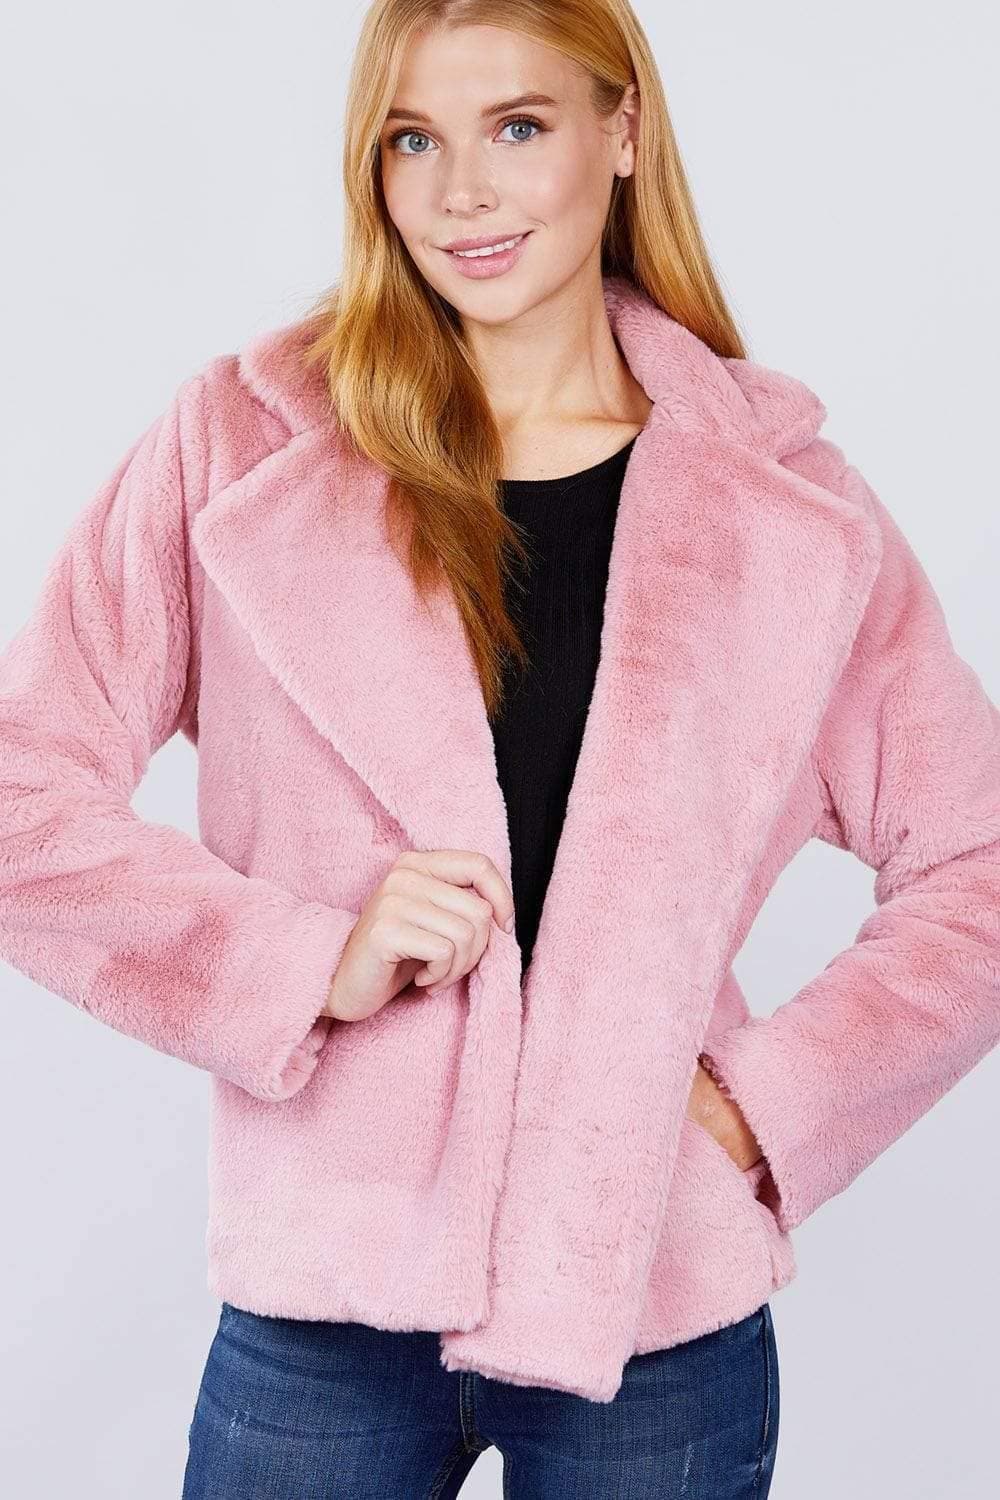 Pink Long Sleeve Faux Fur Jacket - Shopping Therapy jackets